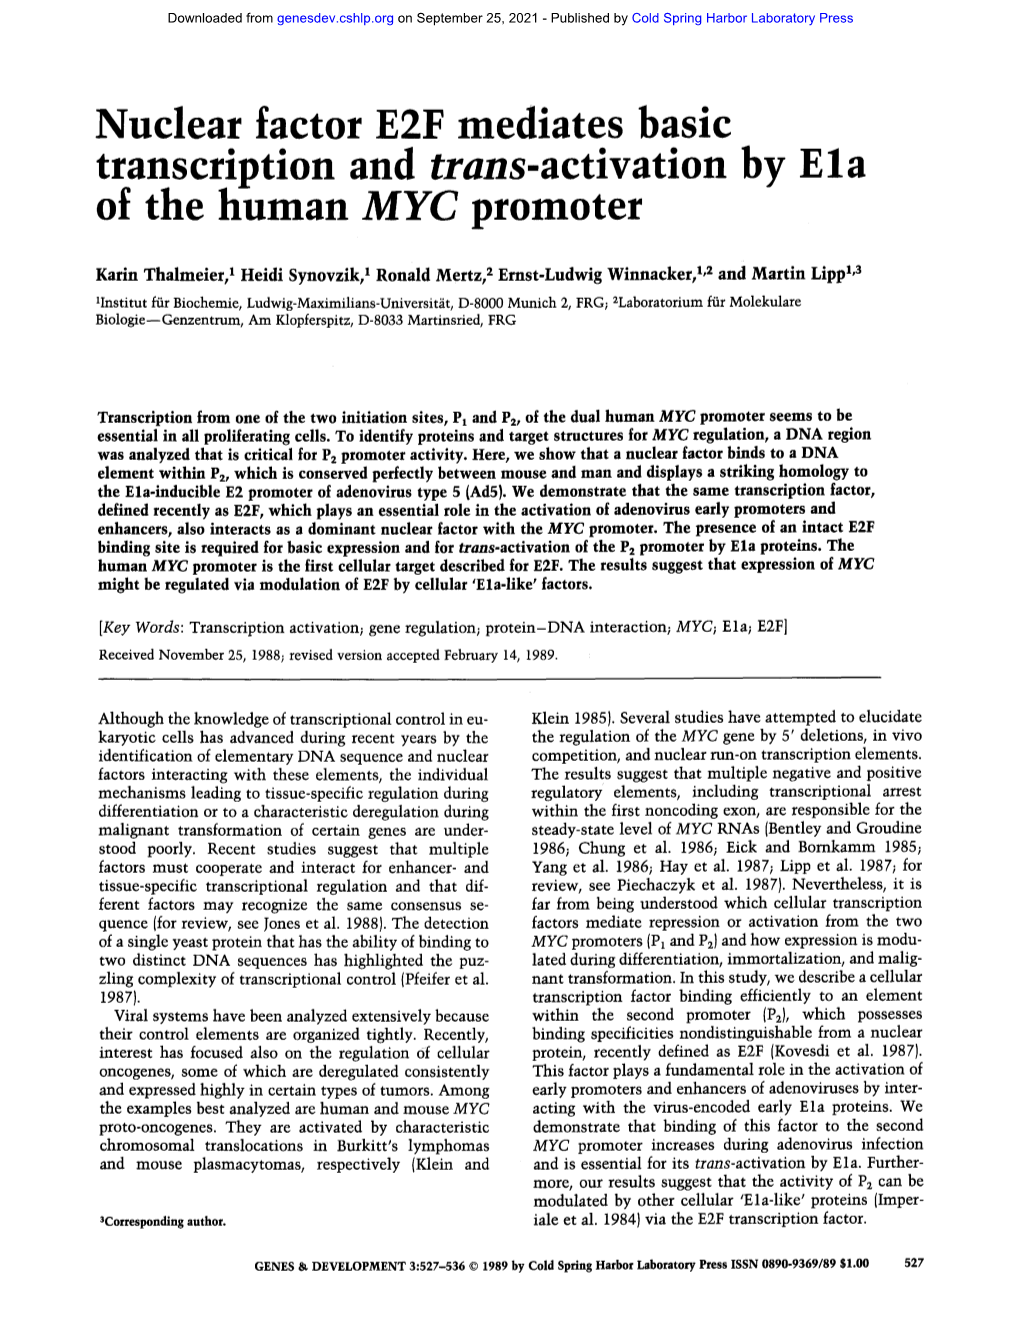 Nuclear Factor E2F Mediates Basic Transcription and Trans-Activation by E La of the Human MYC Promoter